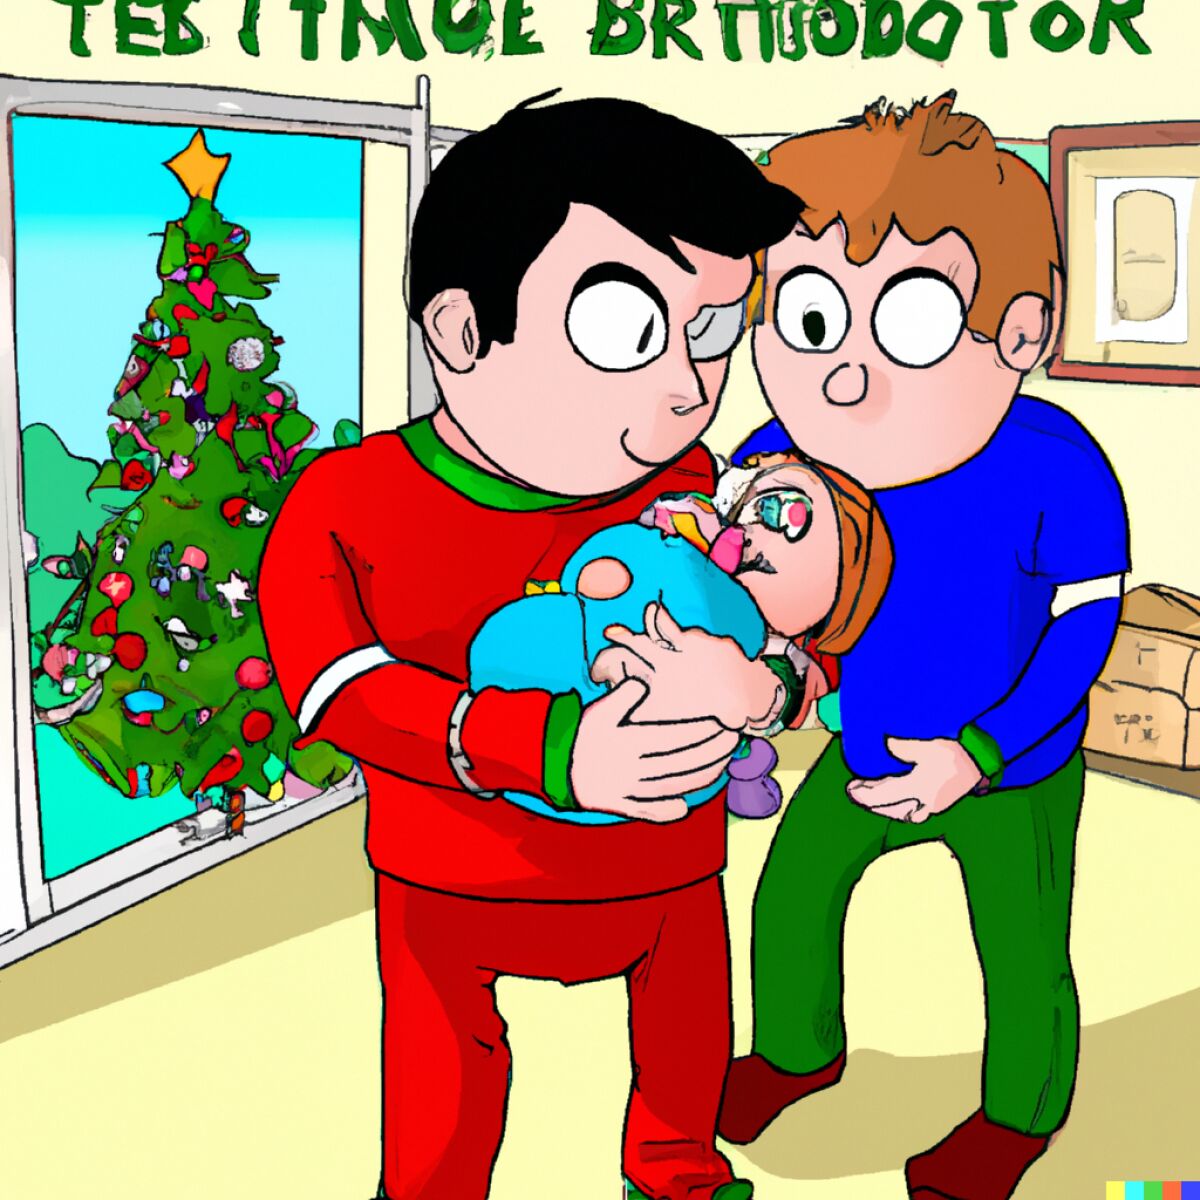 Two men huddled around a baby in a room with a Christmas tree